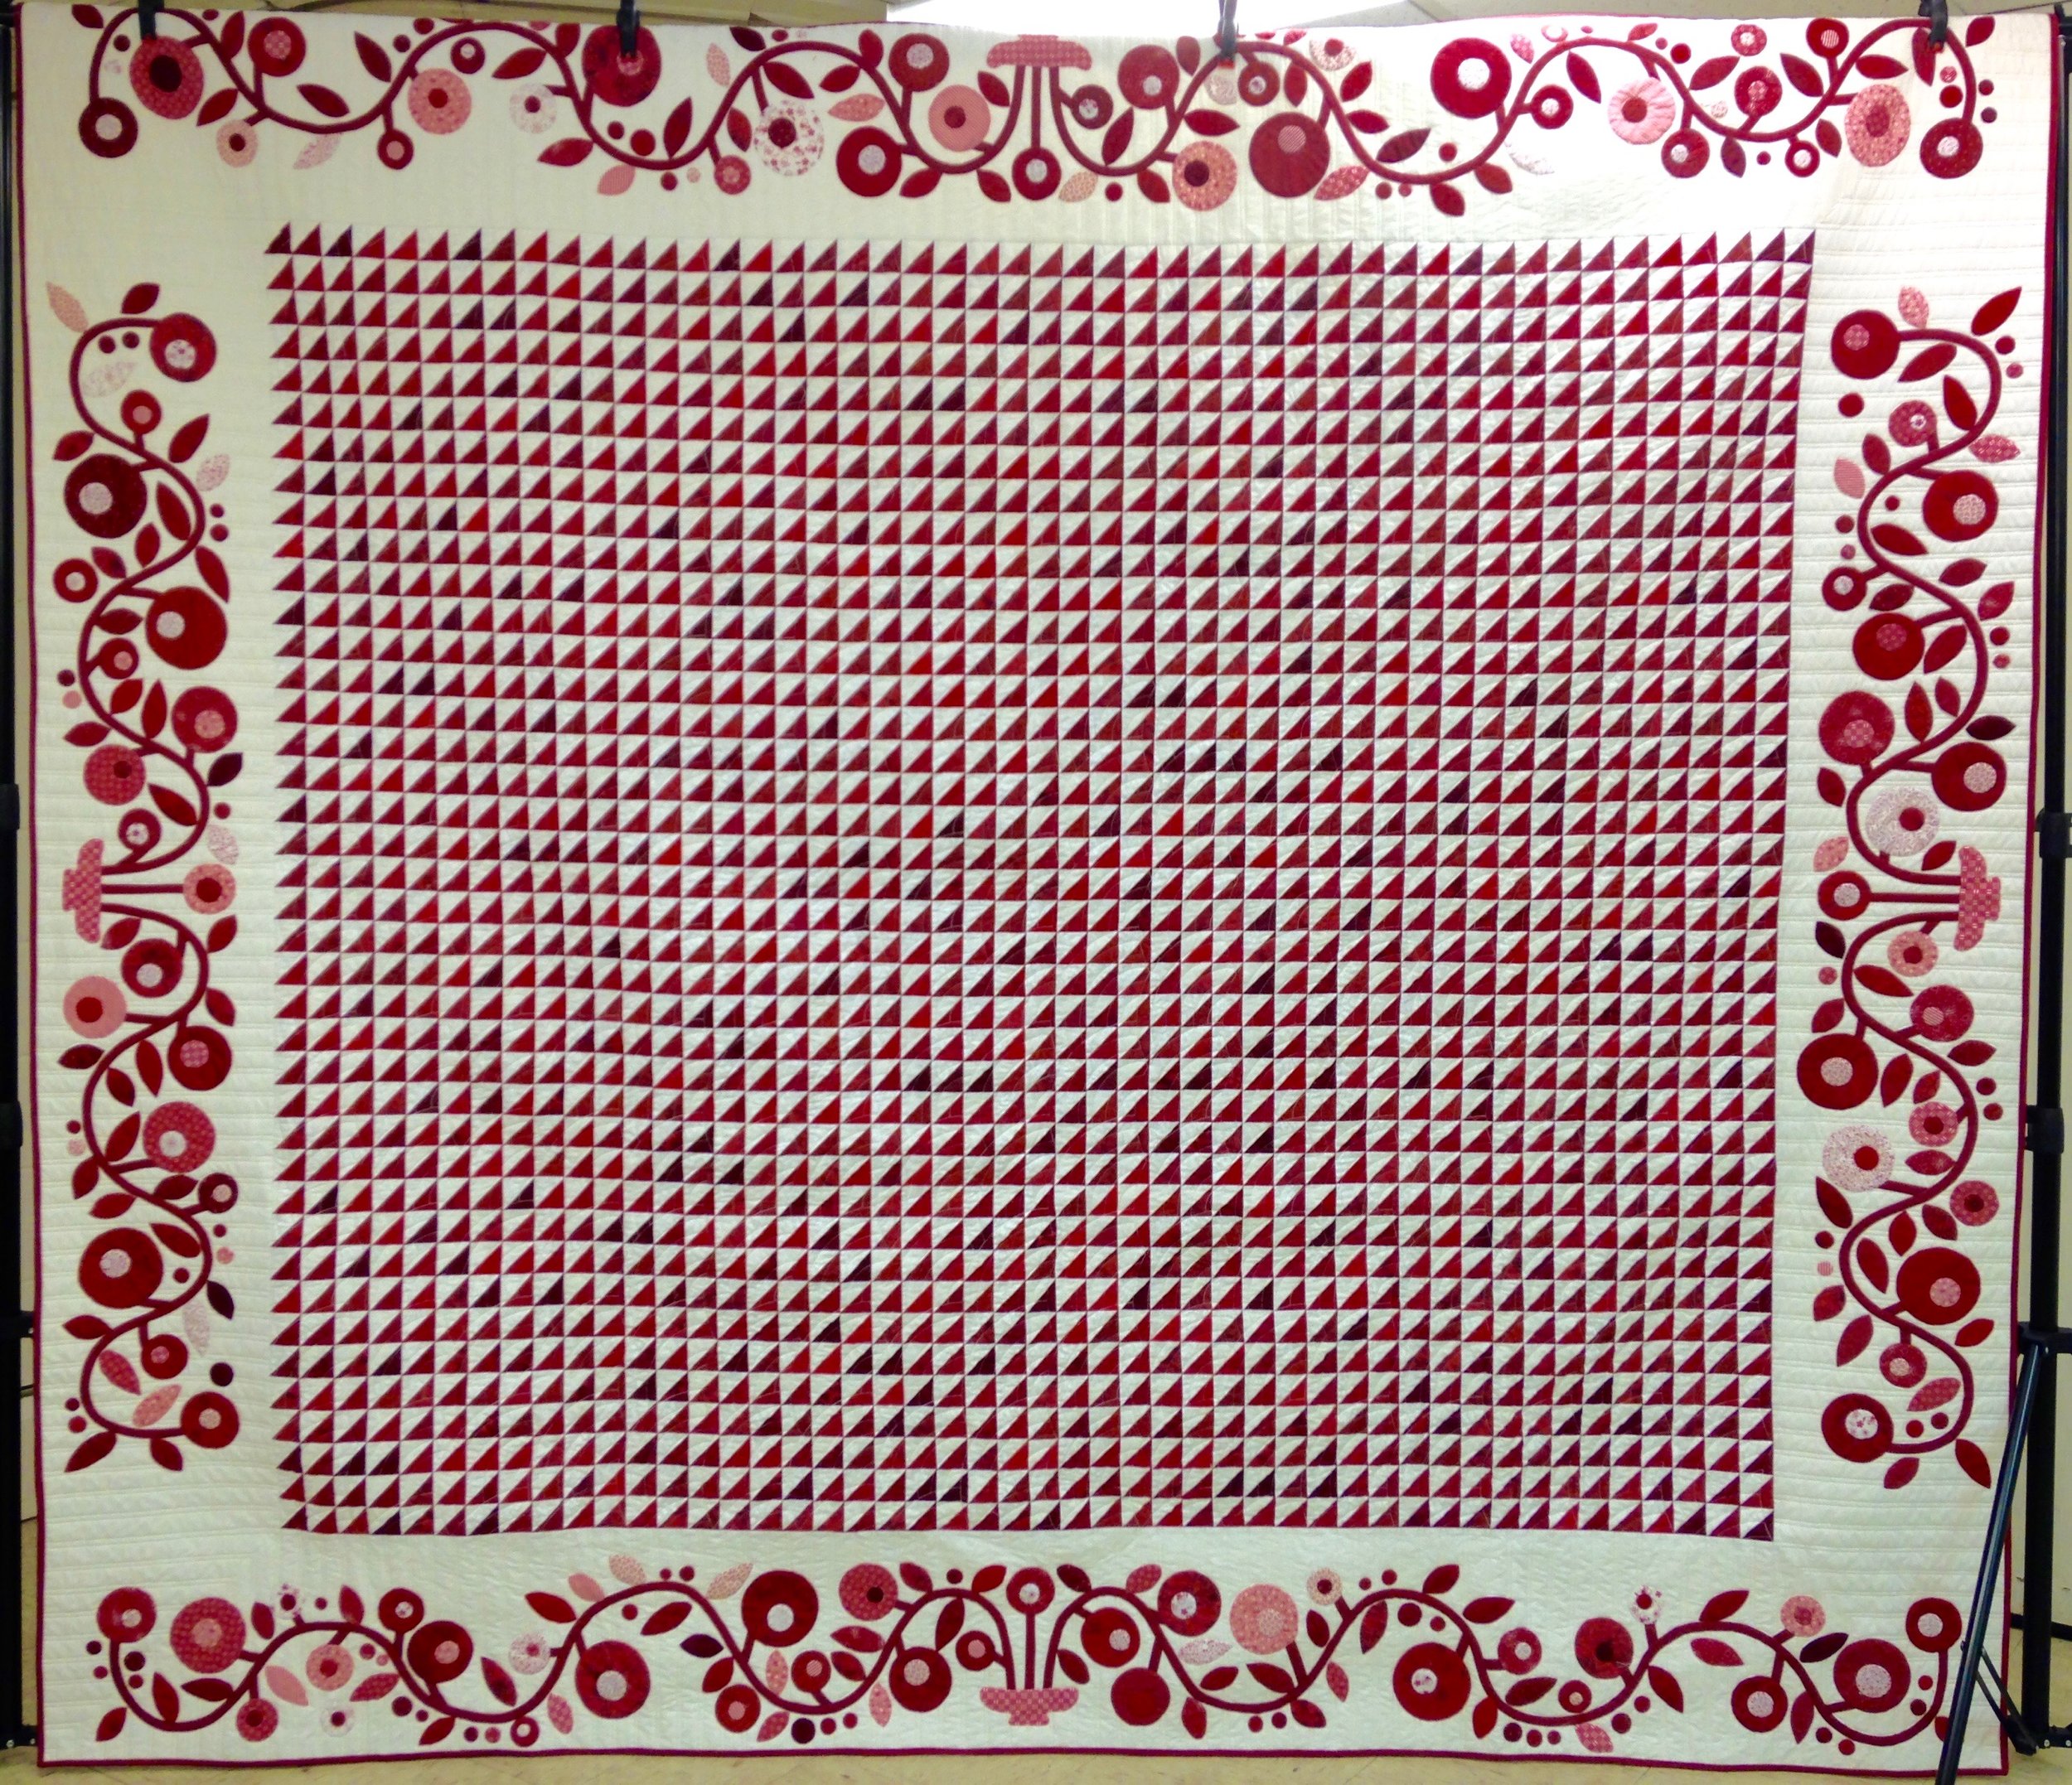 Patty’s Posies, Pieced, Appliquéd, Custom Machine Quilted, Donated by Maple Leaf Quilt Guild, 95 x 103”